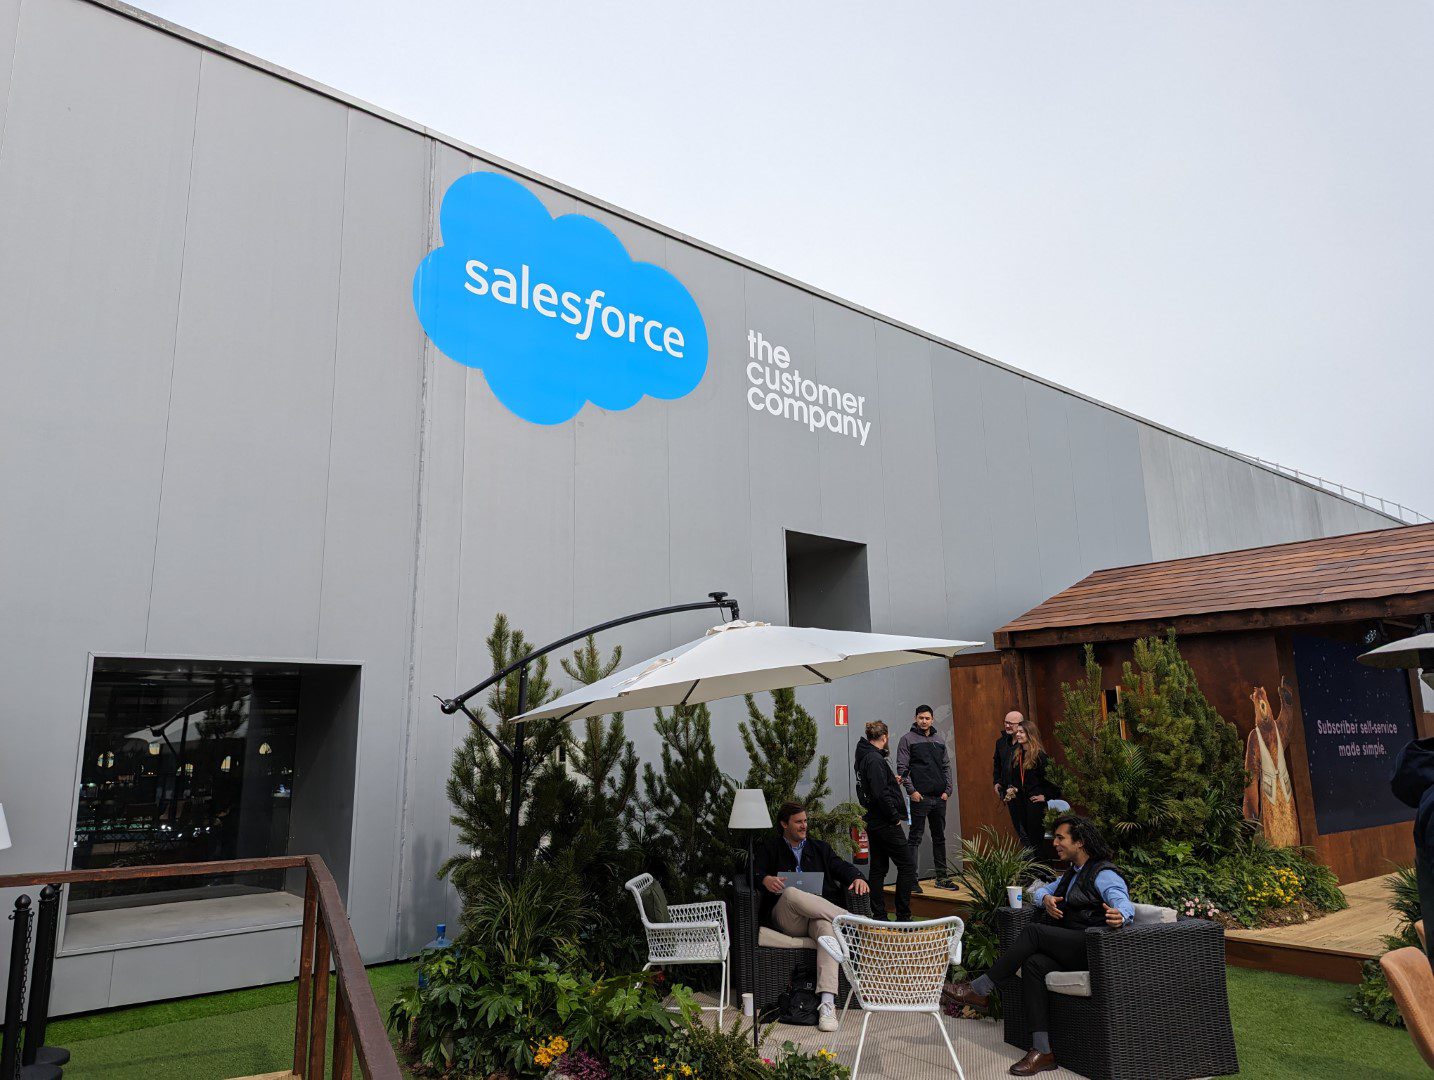 Salesforce welcomes Databricks to the Data Cloud